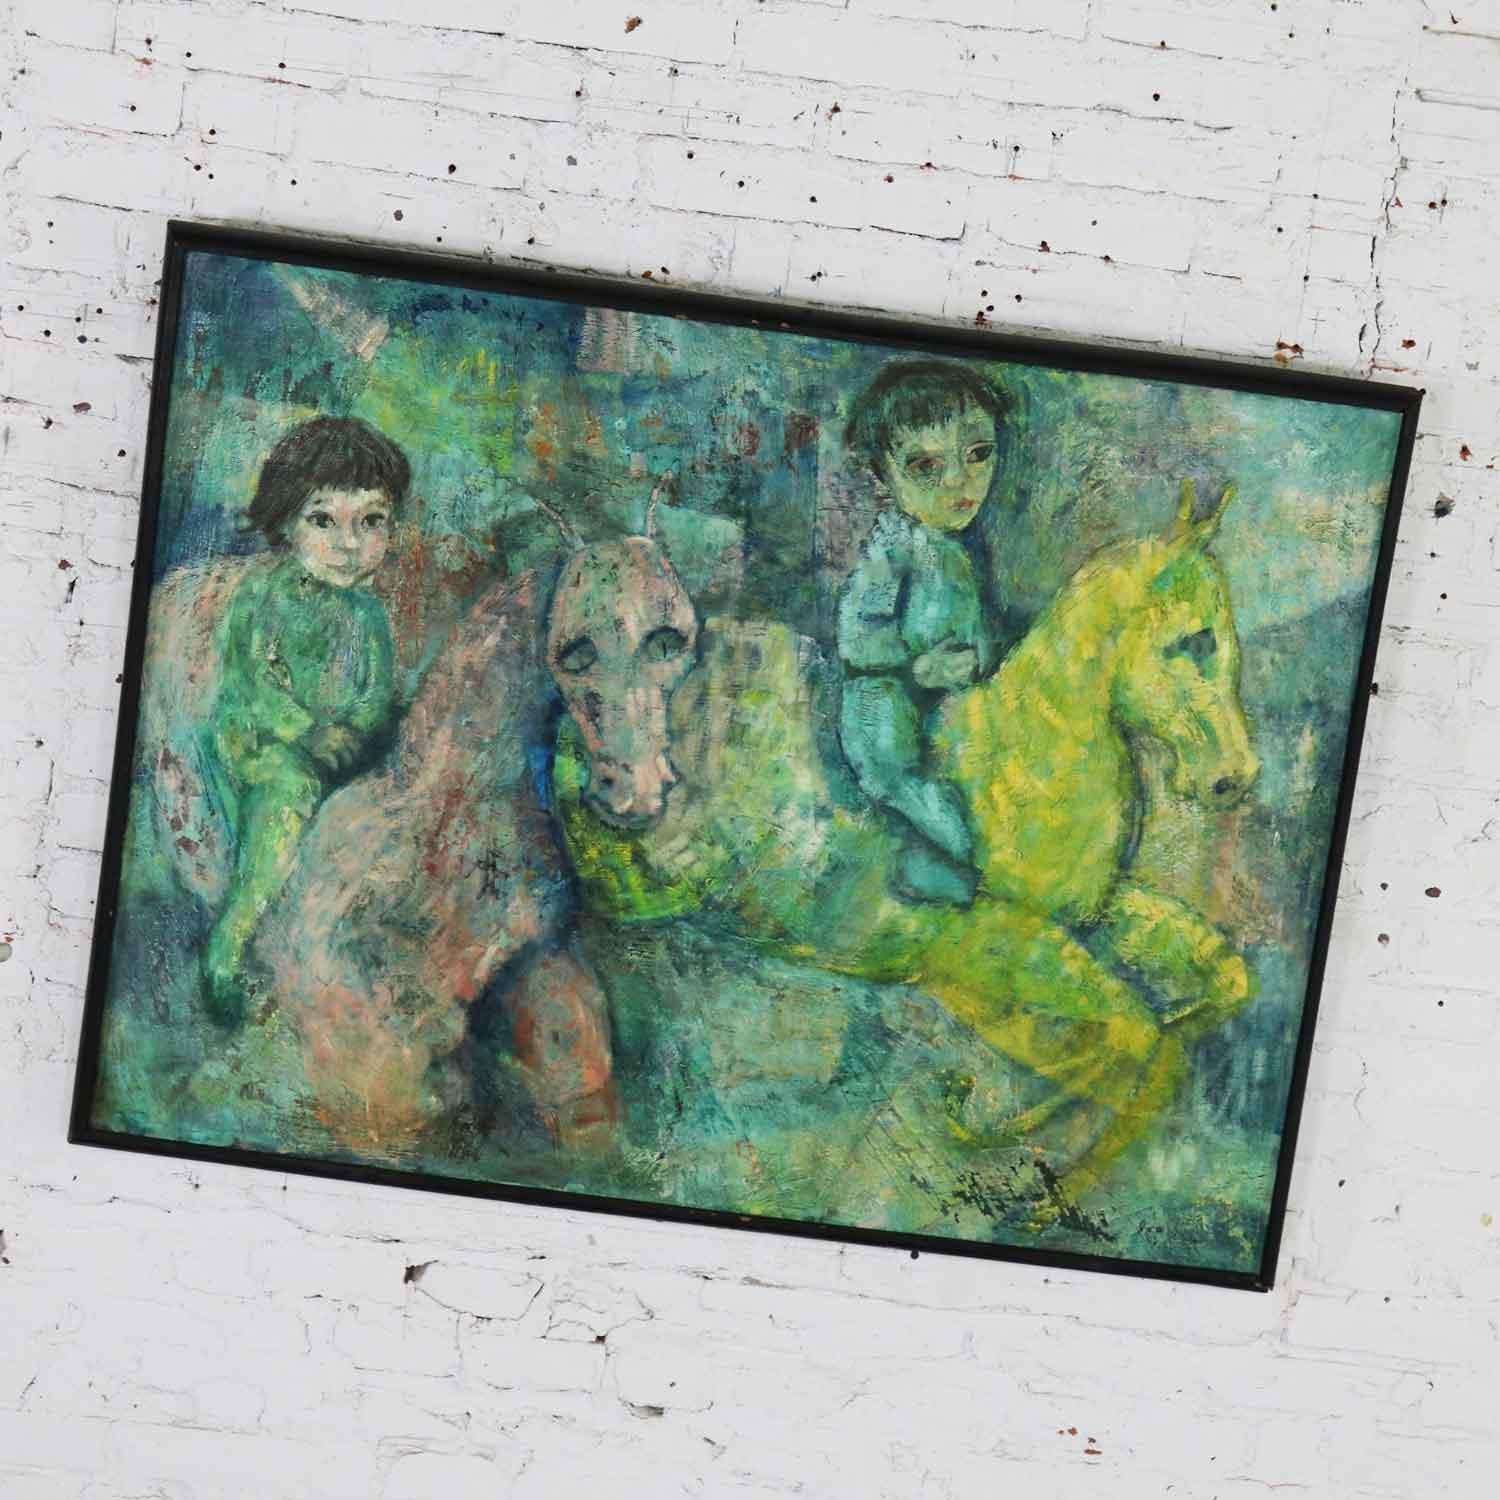 Incredible impressionist style painting on hardboard of children on horseback signed Brooks Woollcott (now Powell). It is in good original condition with its original black painted wood frame. We have stabilized the frame and added a new coat of